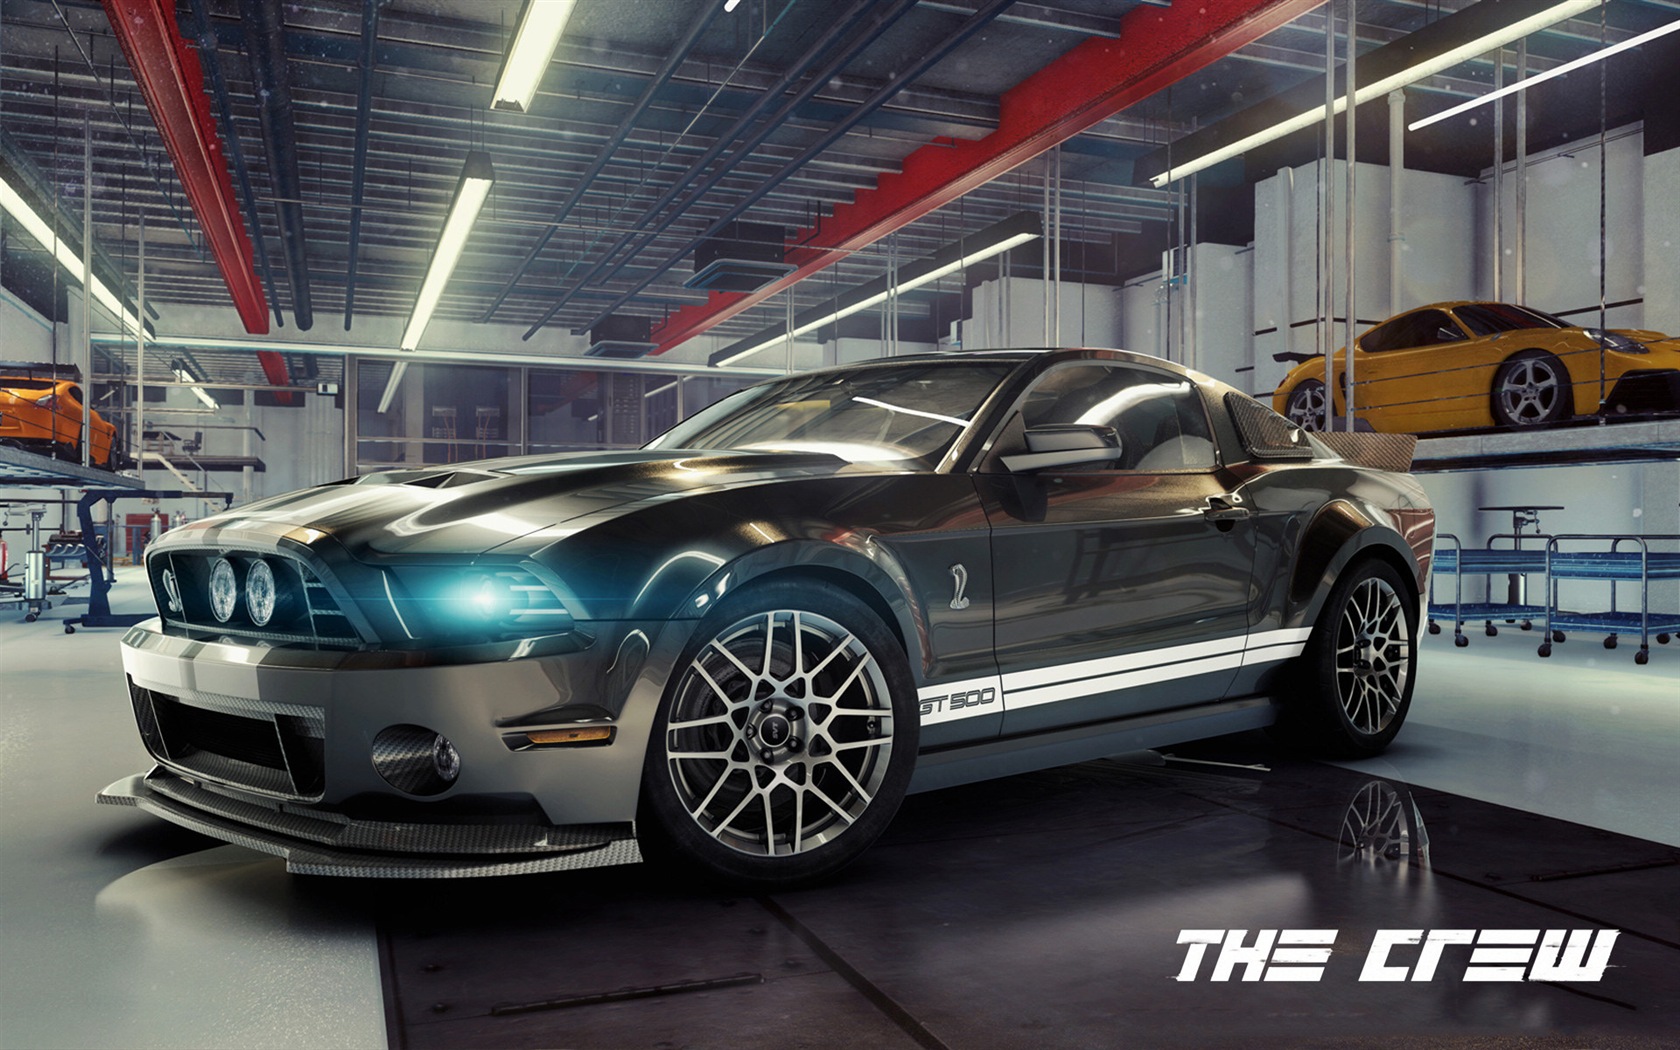 The Crew game HD wallpapers #11 - 1680x1050